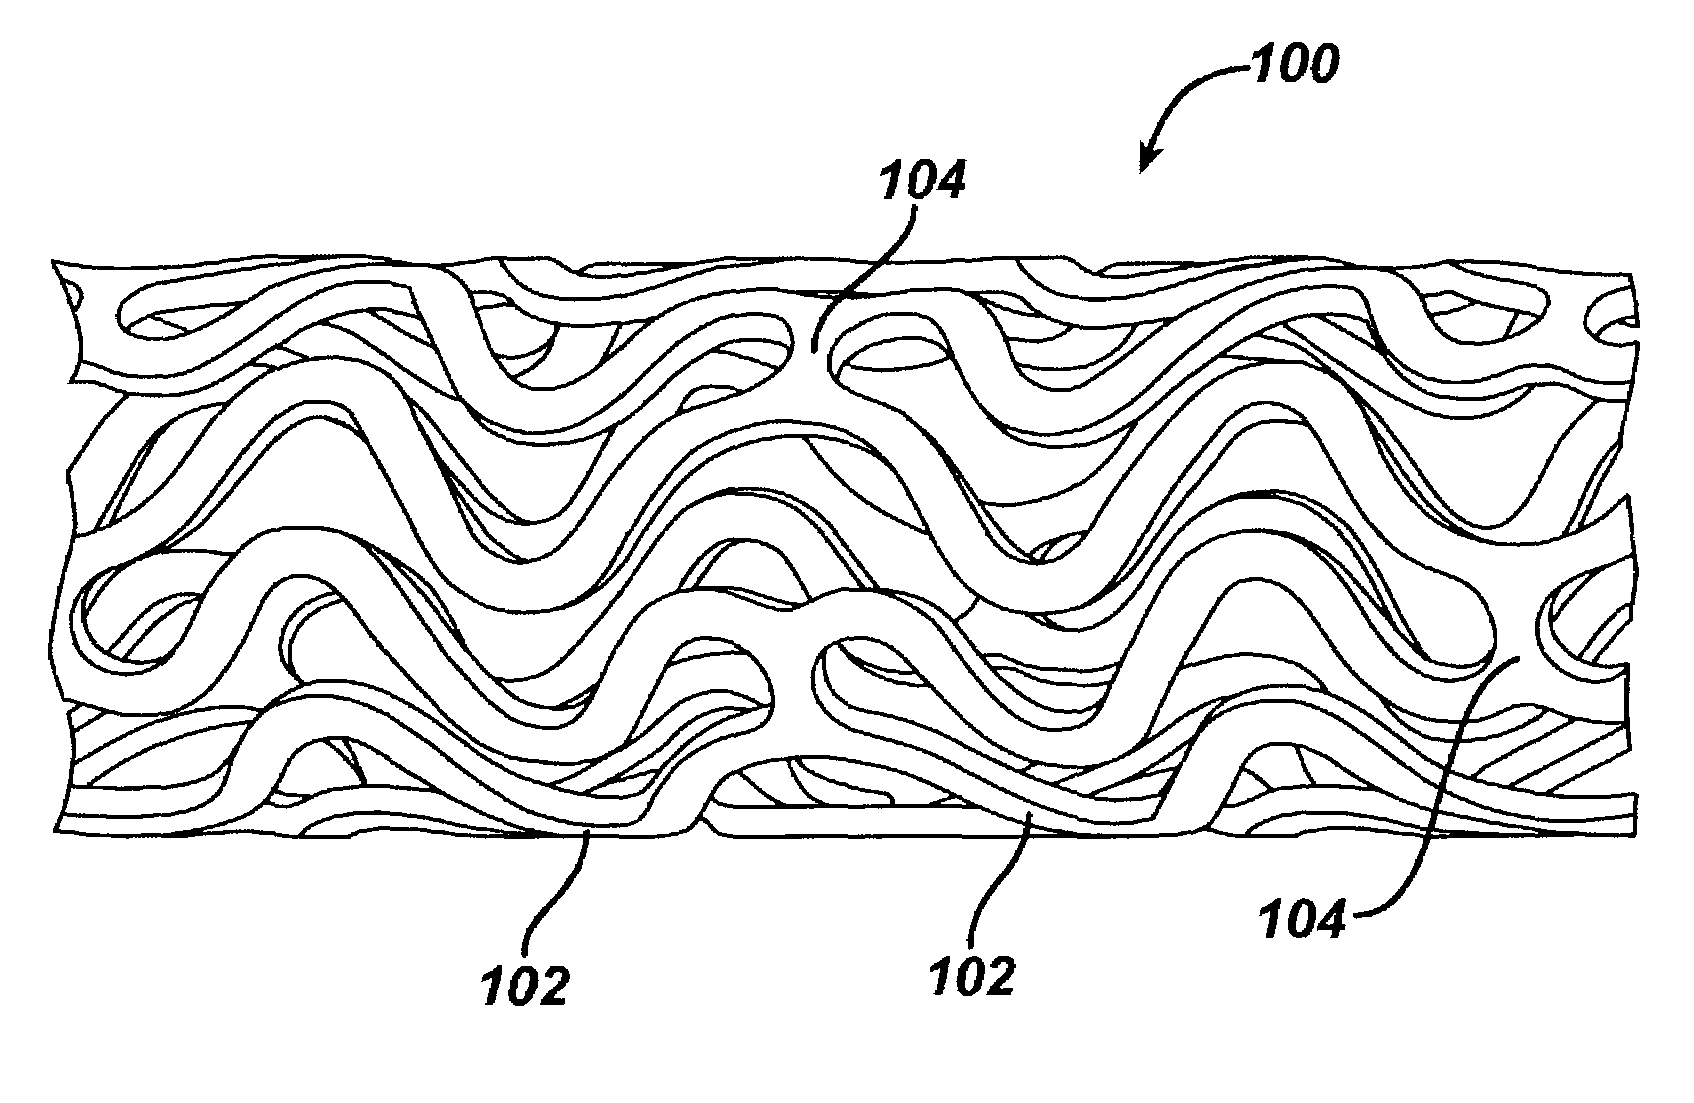 Coated medical devices for the prevention and treatment of vascular disease